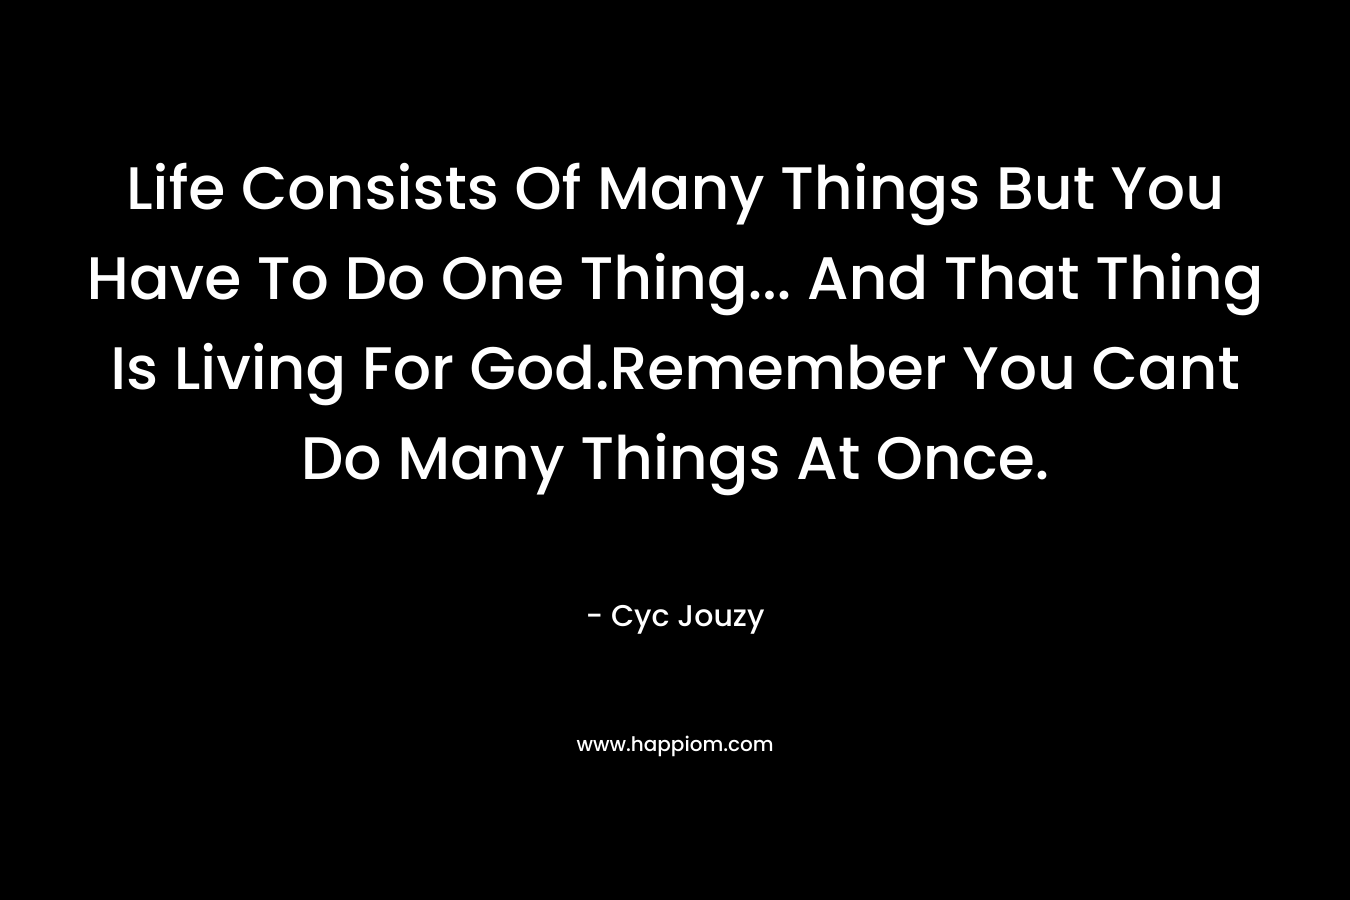 Life Consists Of Many Things But You Have To Do One Thing… And That Thing Is Living For God.Remember You Cant Do Many Things At Once. – Cyc Jouzy